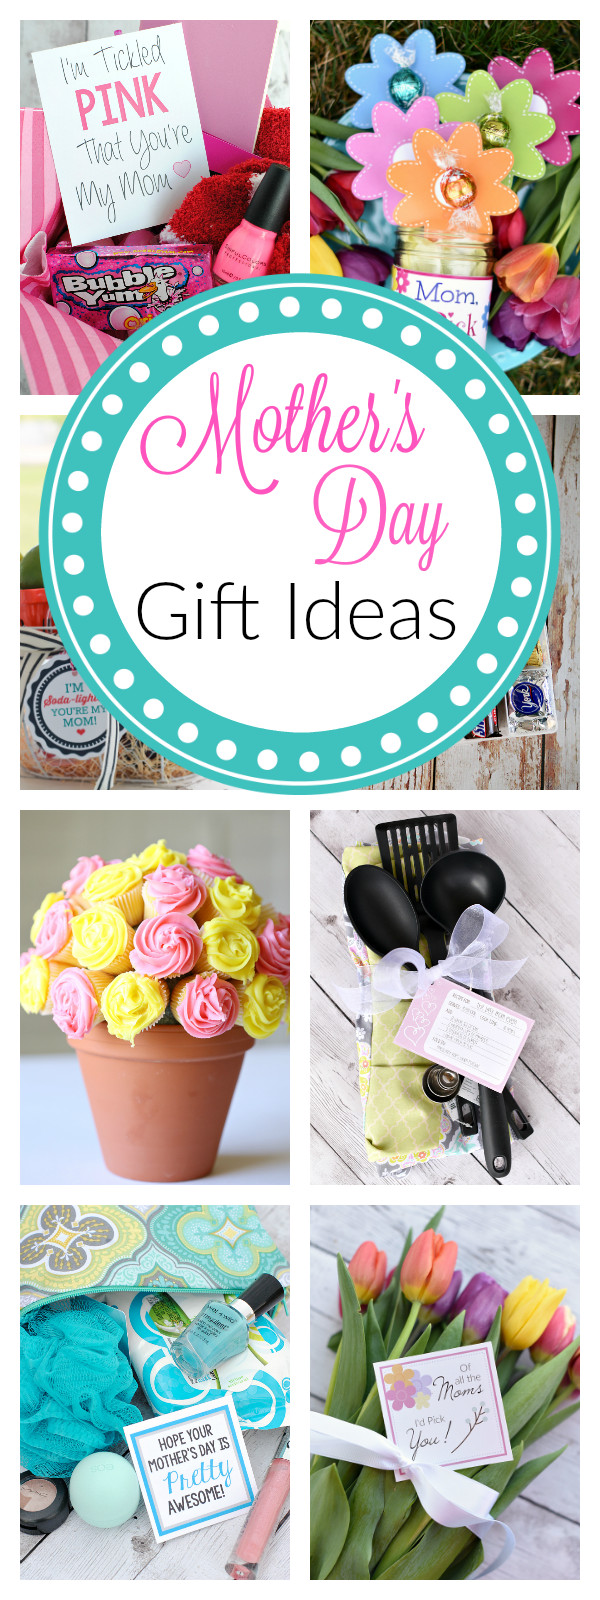 Mother'S Day Gift Ideas For Mother In Law
 25 Cute Mother s Day Gifts